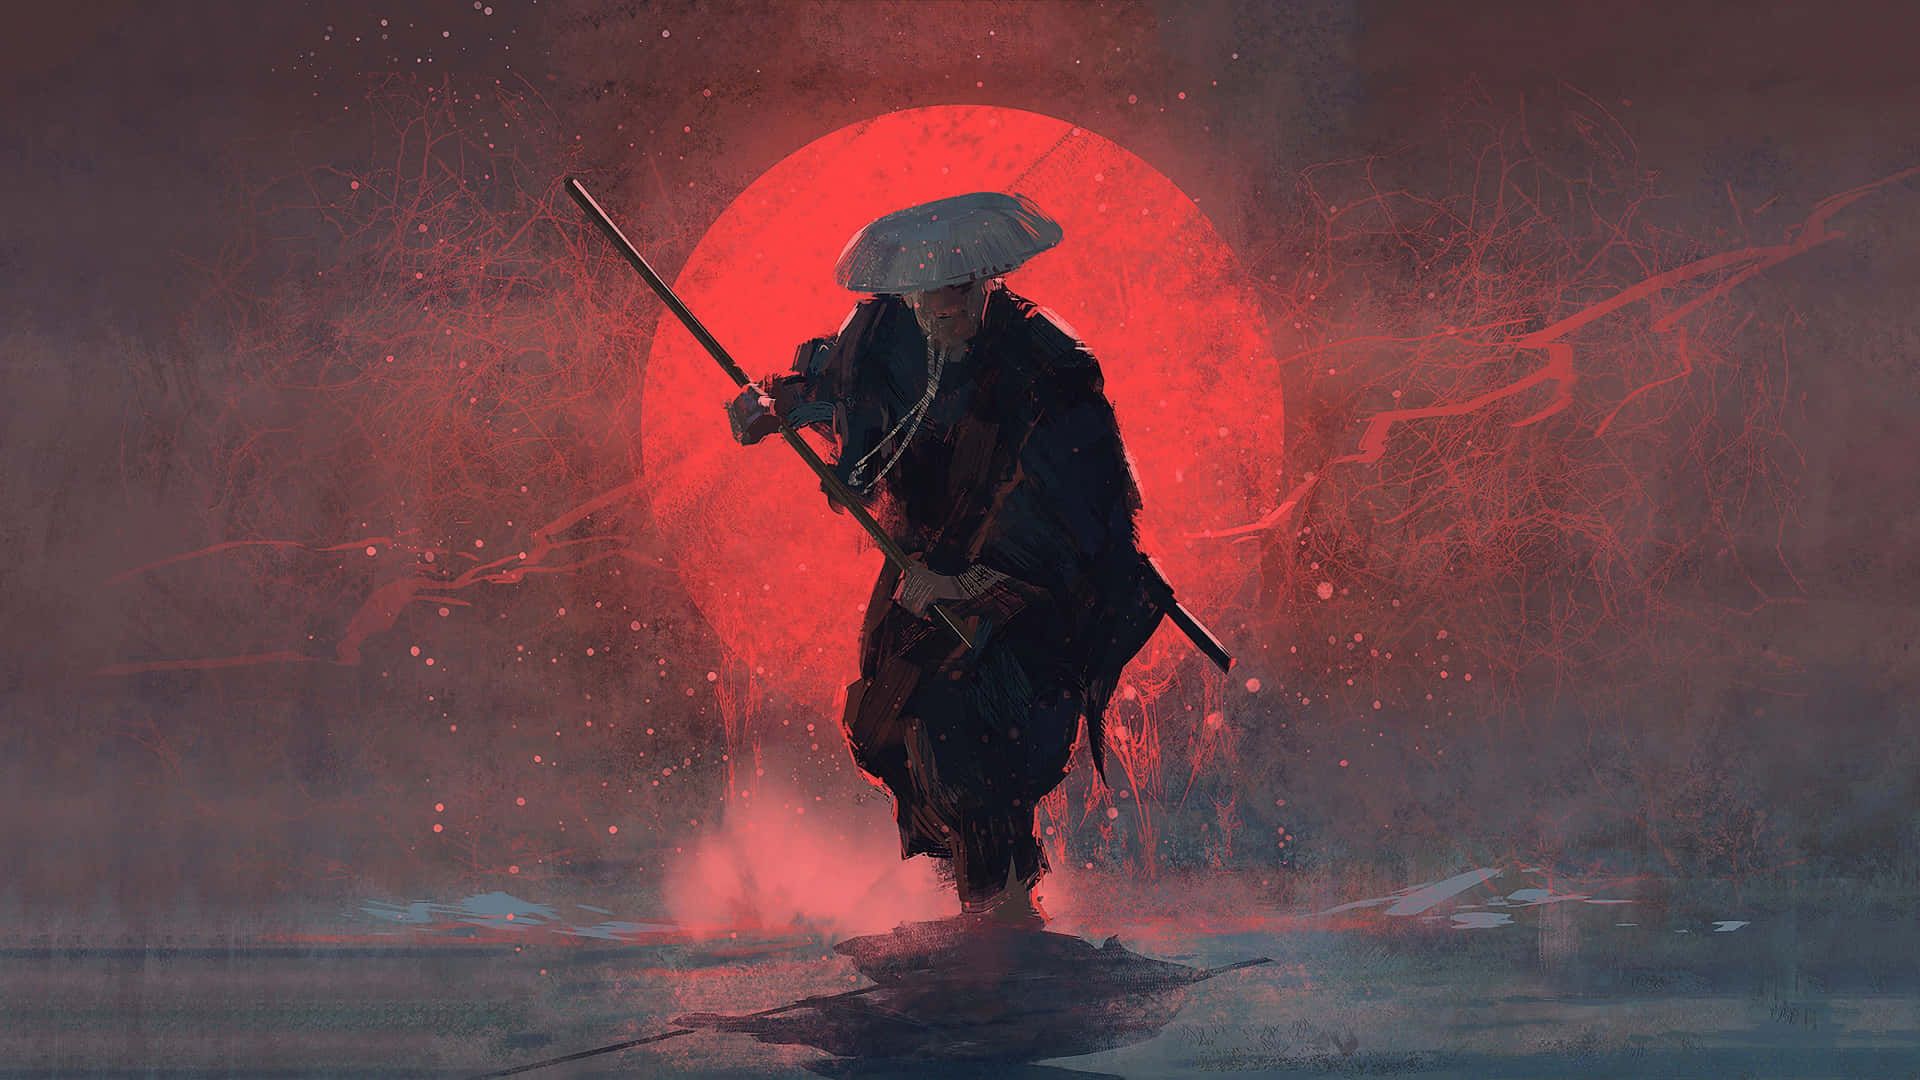 A man with an umbrella and sword in the water - Samurai